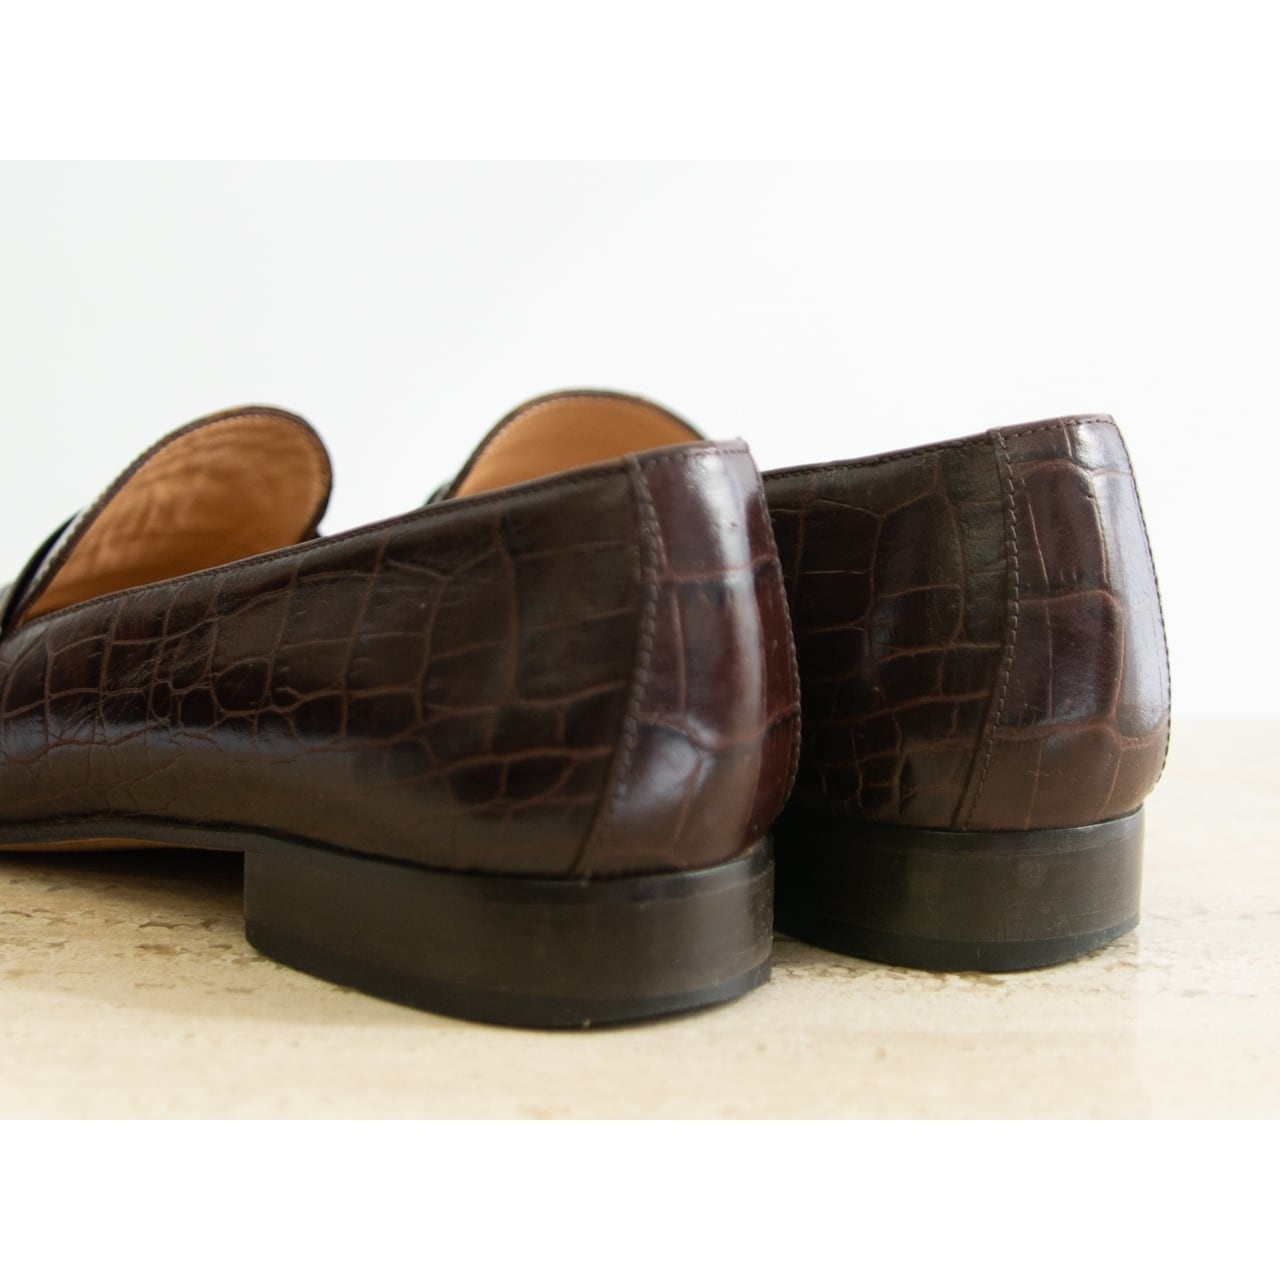 RALPH LAUREN】Made in Italy Leather Loafer 6B（ラルフローレン 